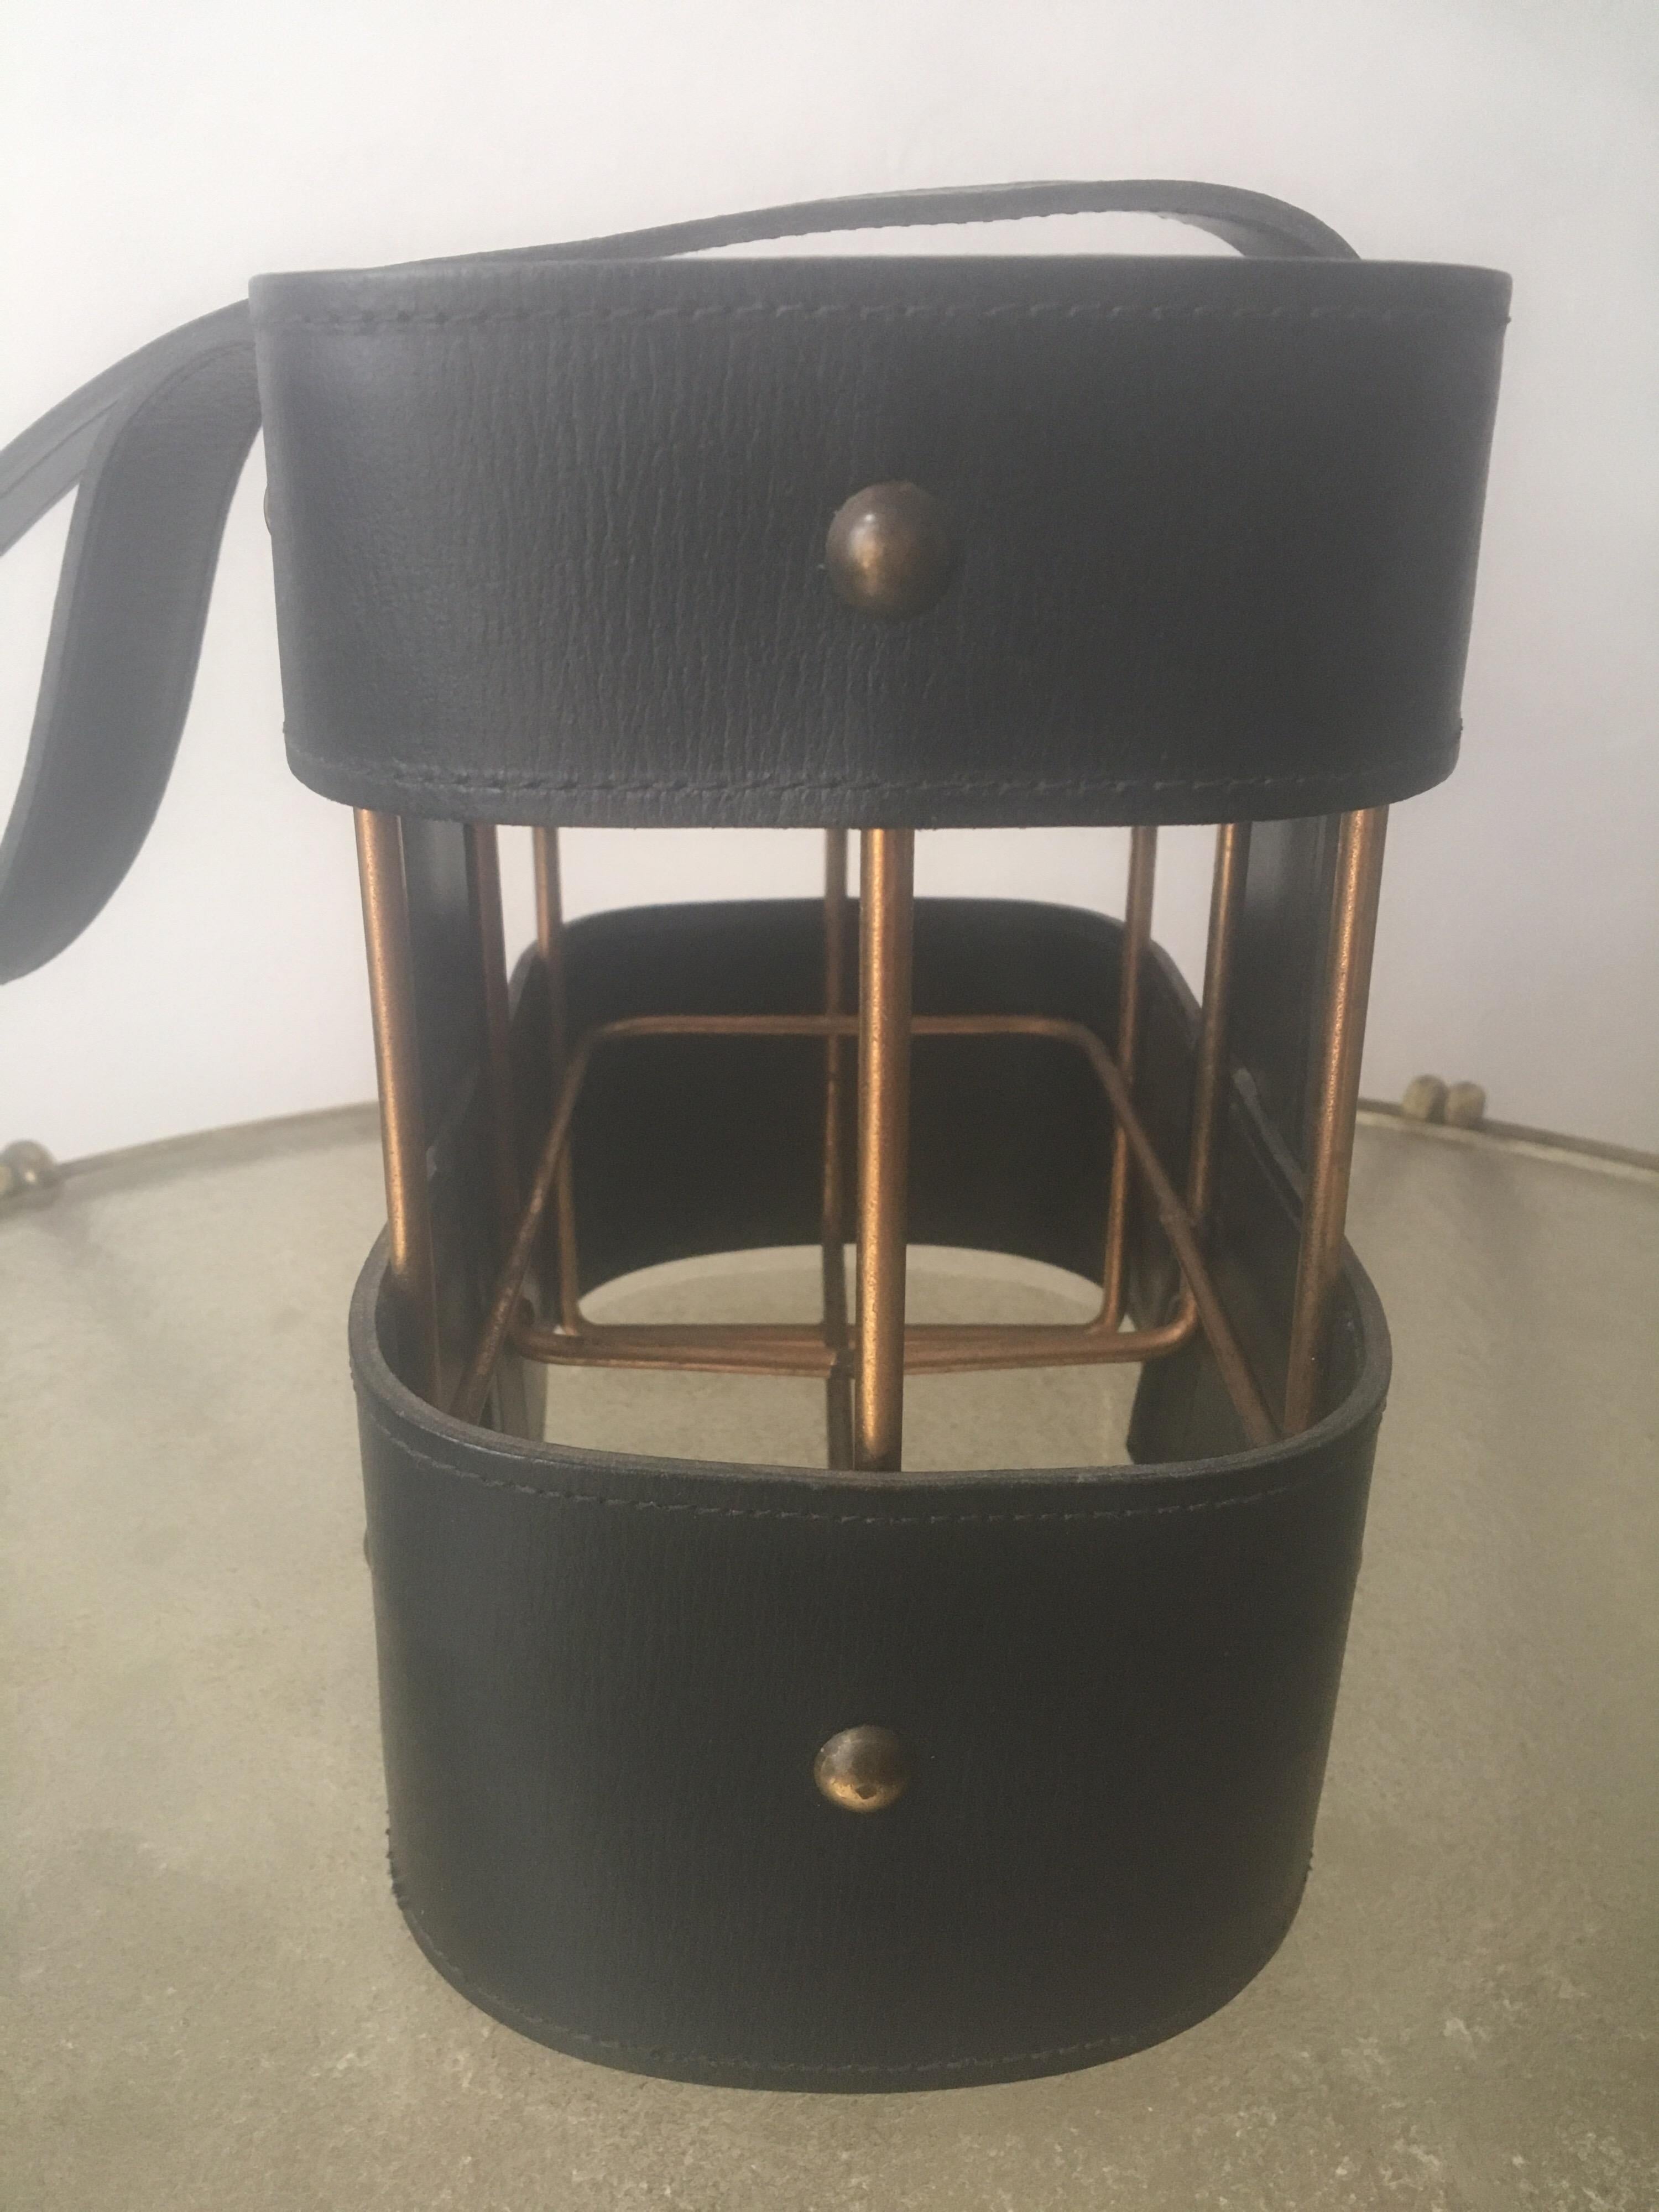 Jacques Adnet Black Leather and Brass Bottle Holder, French, 1950s For Sale 1